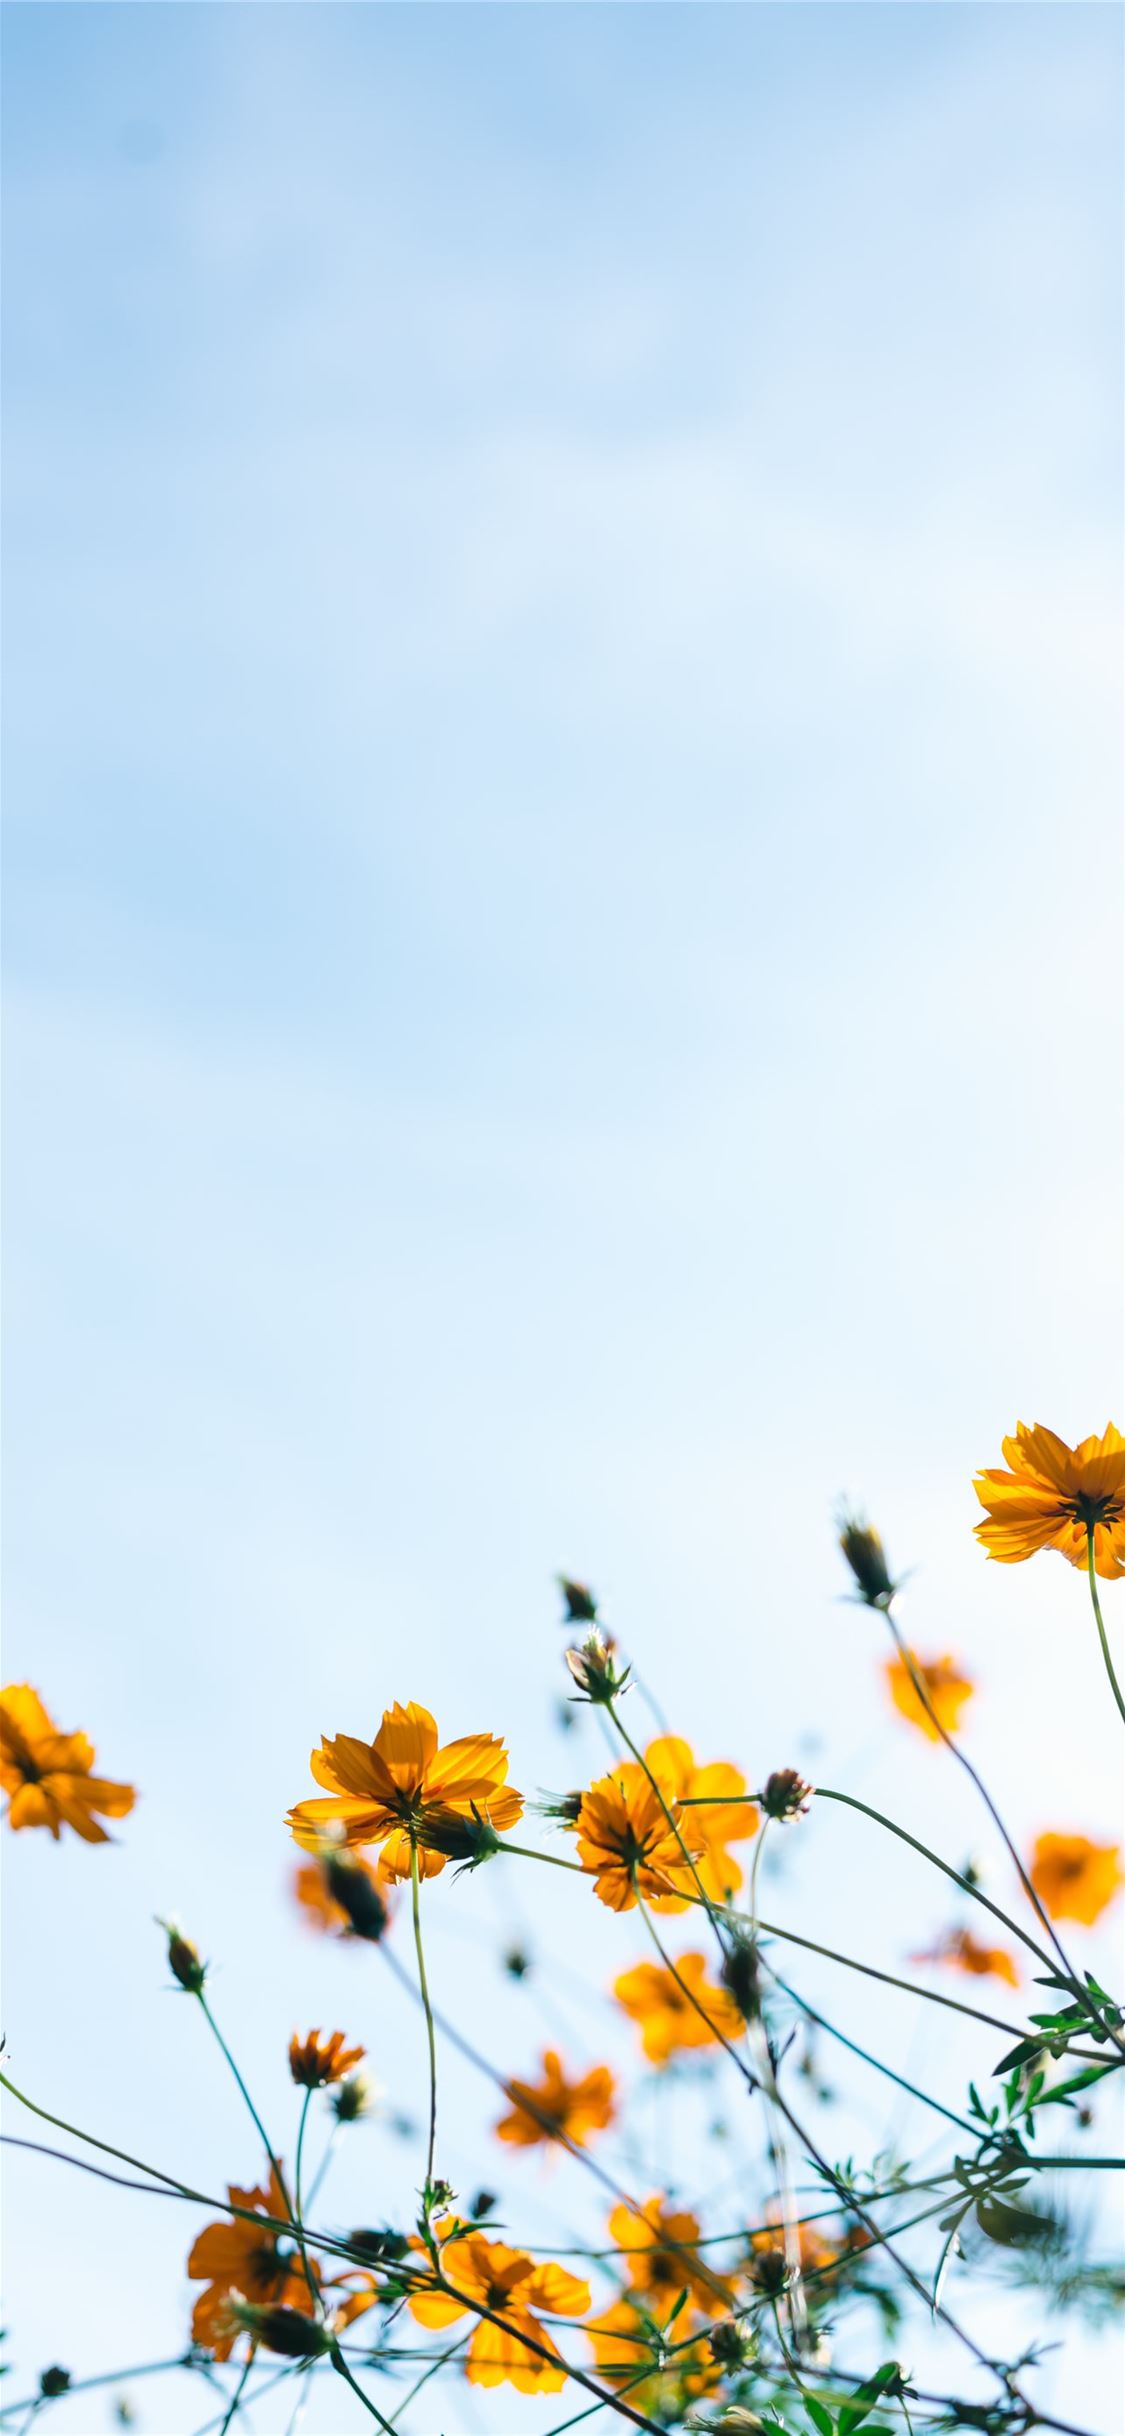 close shot of yellow flowers iPhone X Wallpaper Free Download